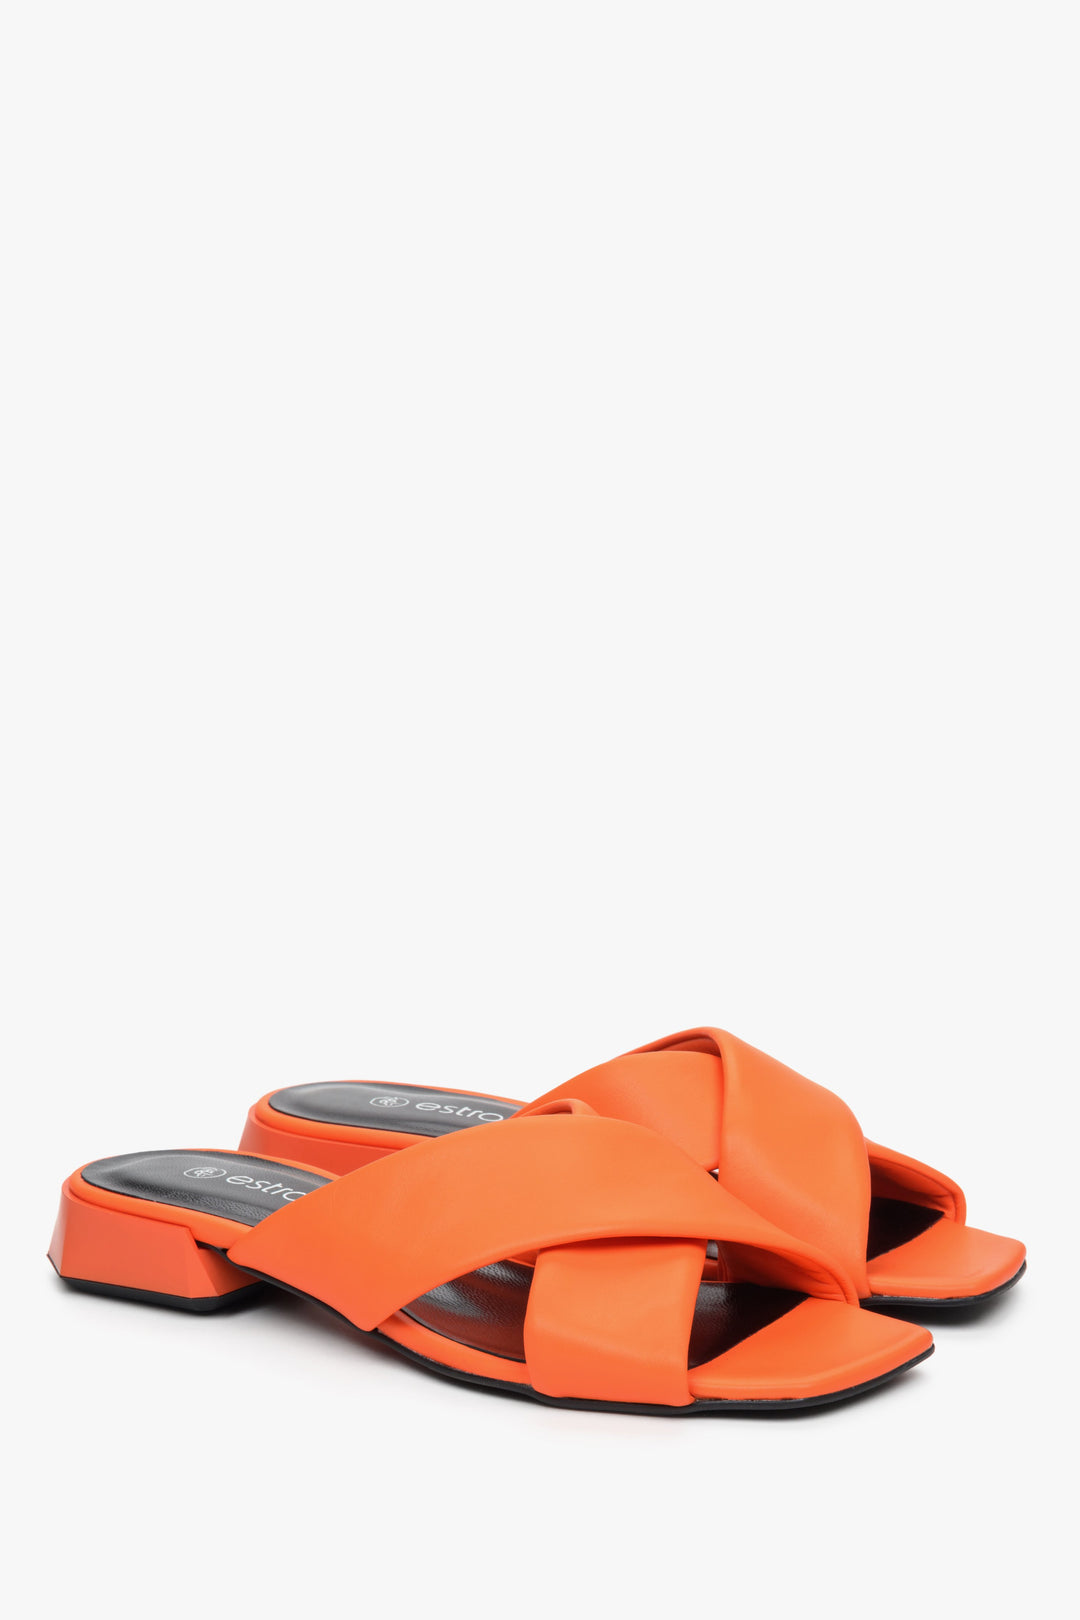 Women's Estro leather mules for summer with cross-straps on a low heel, orange colour.